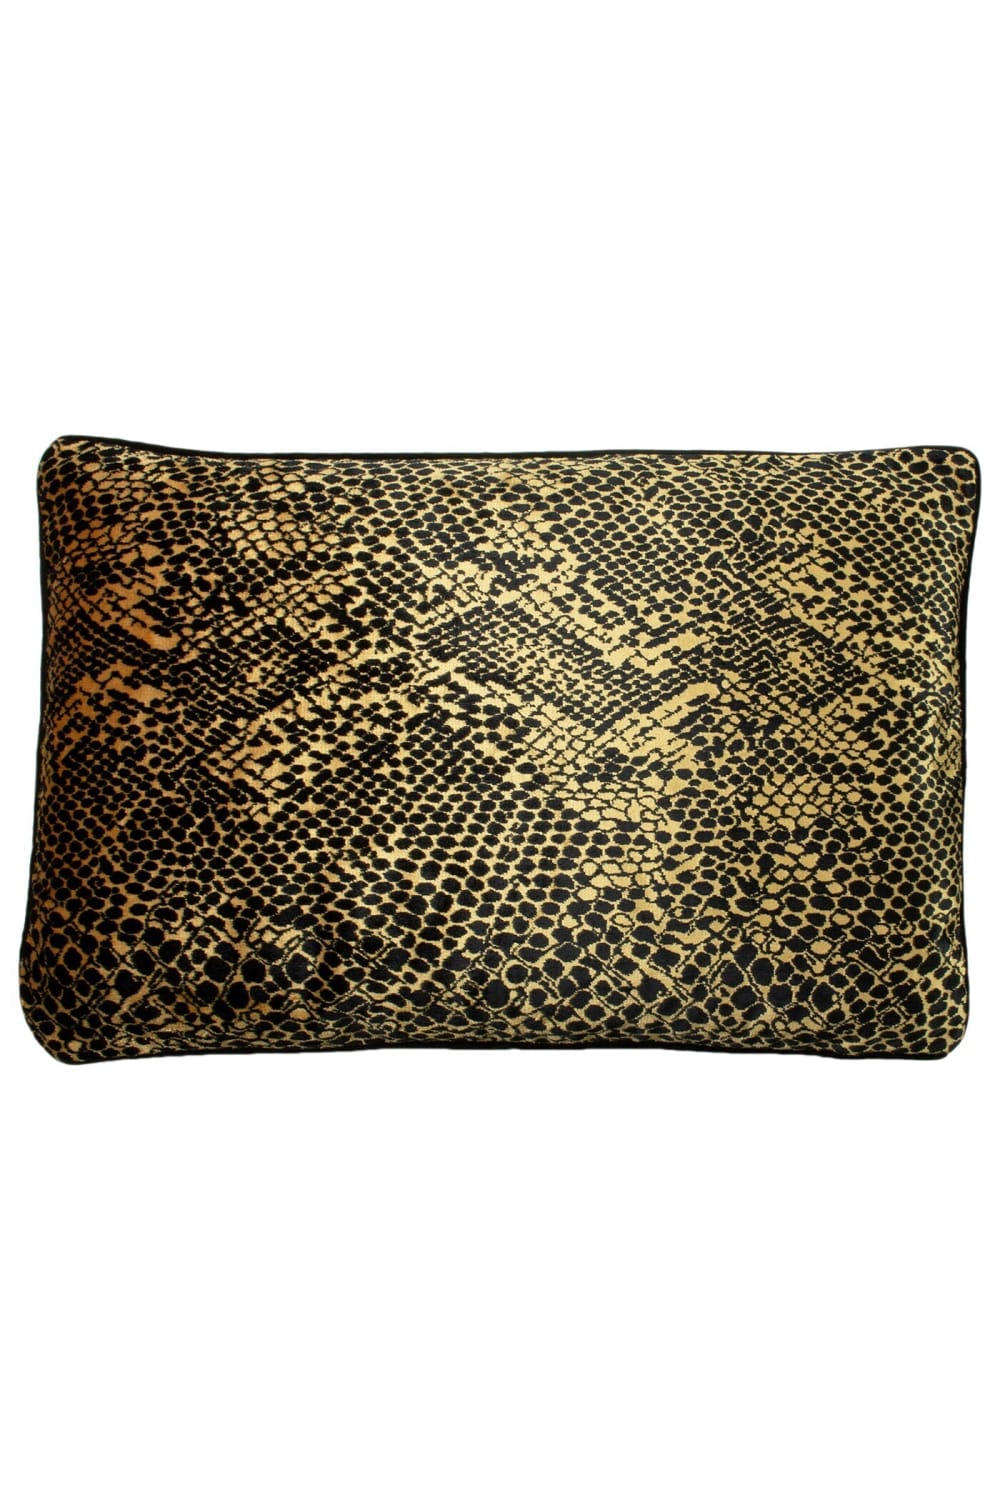 Paoletti Python Throw Pillow Cover (Gold/Black) (One Size)